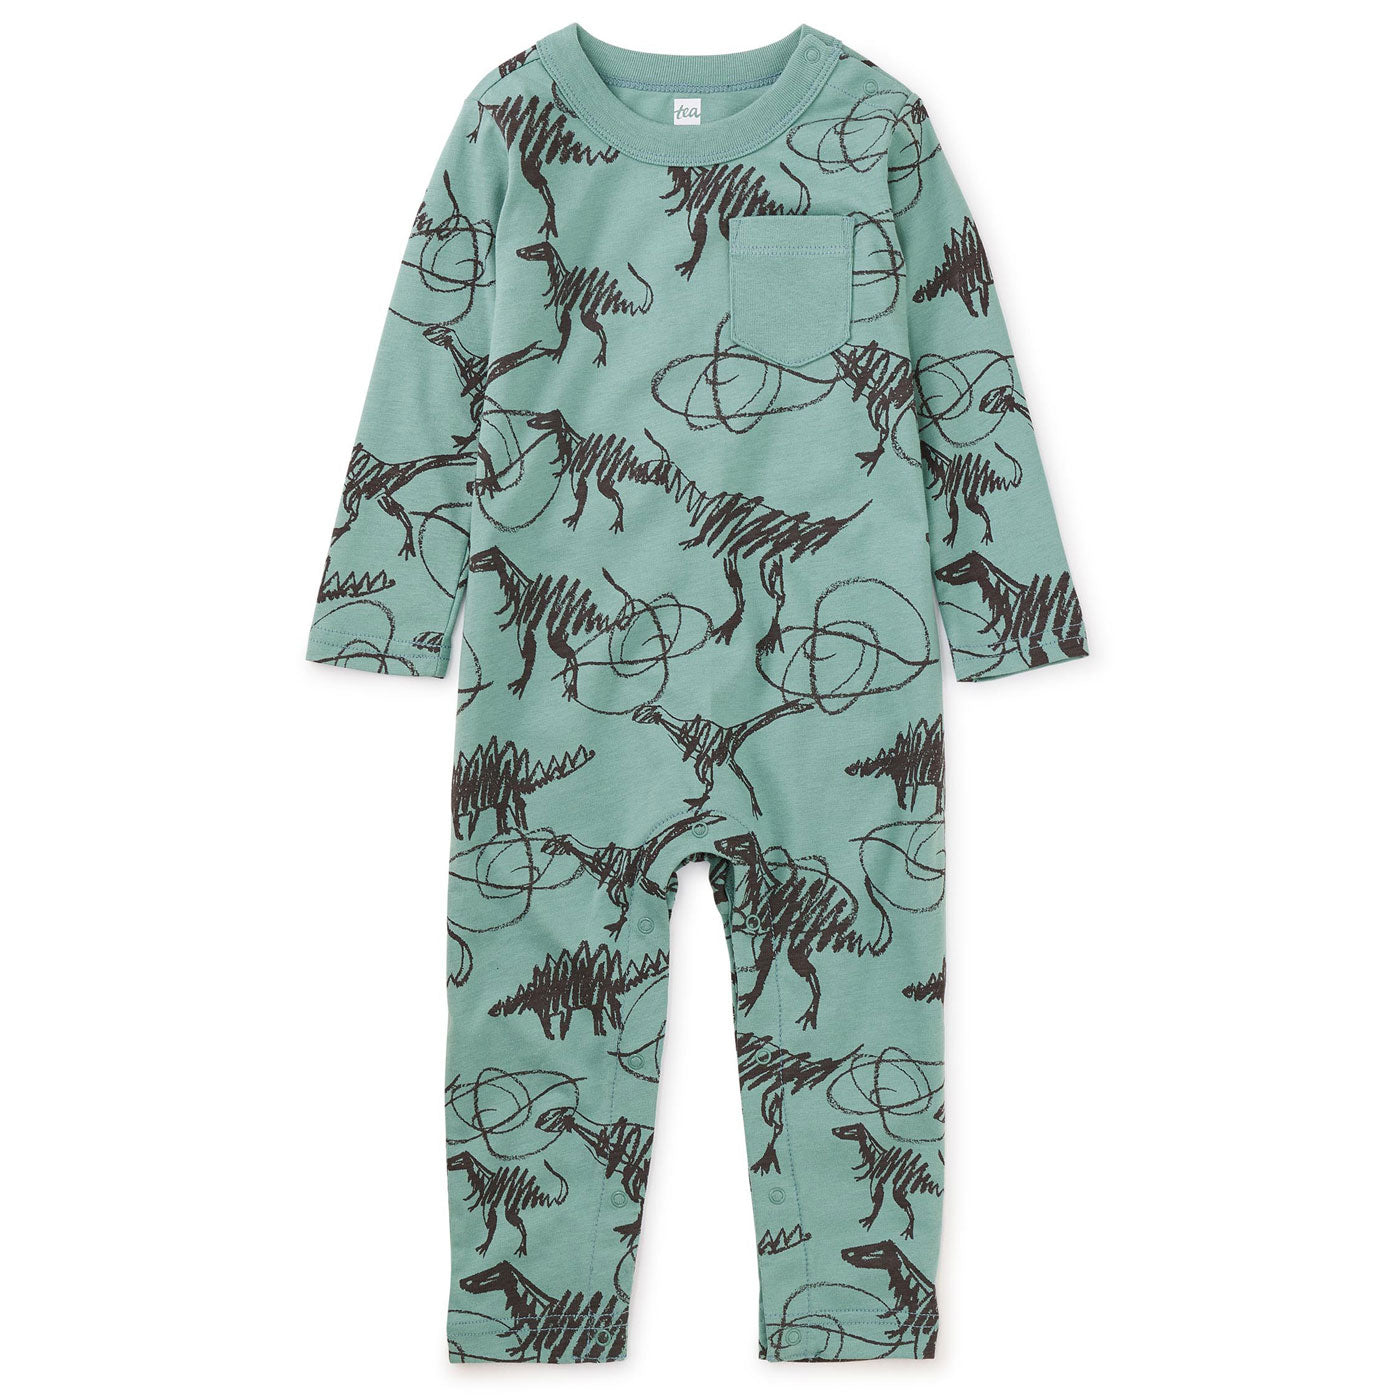 Tea Collection Long Sleeve Pocket Baby Romper - Scribbled Dinosaurs